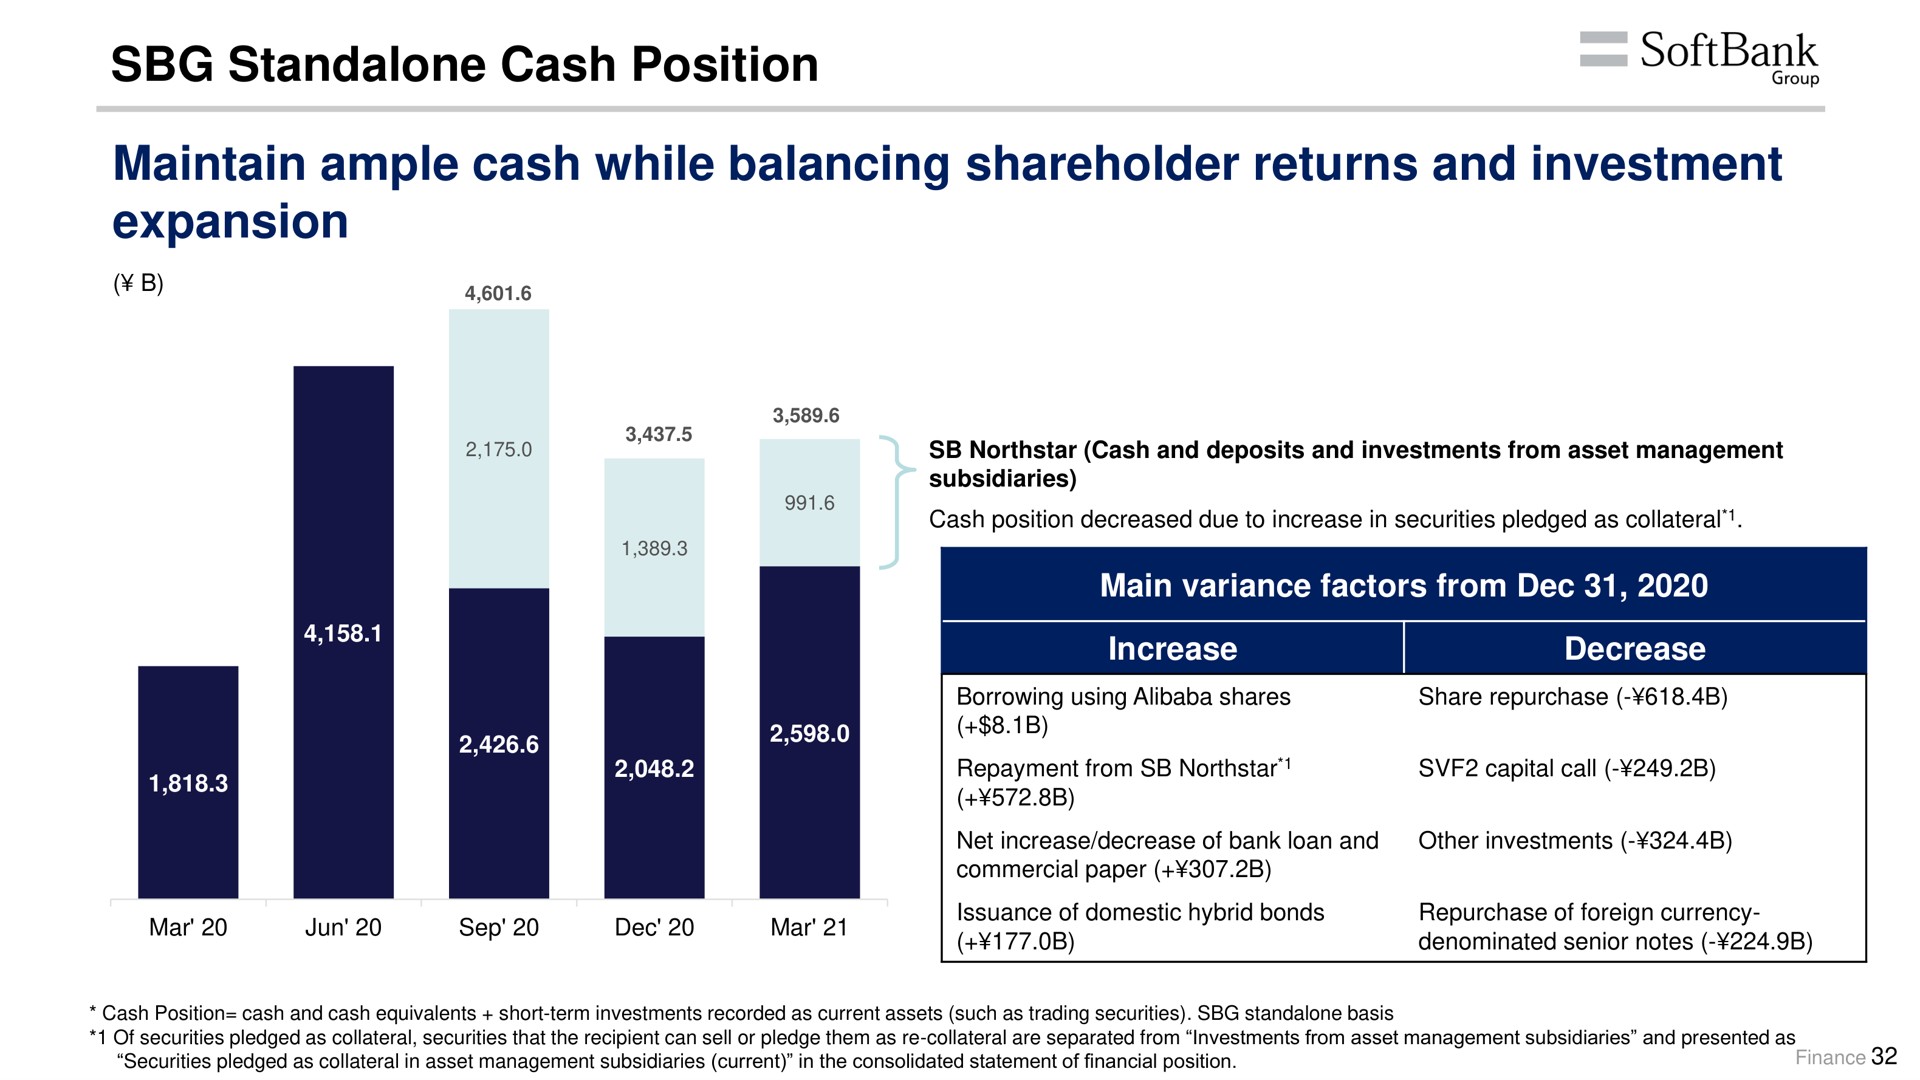 cash position maintain ample cash while balancing shareholder returns and investment expansion | SoftBank